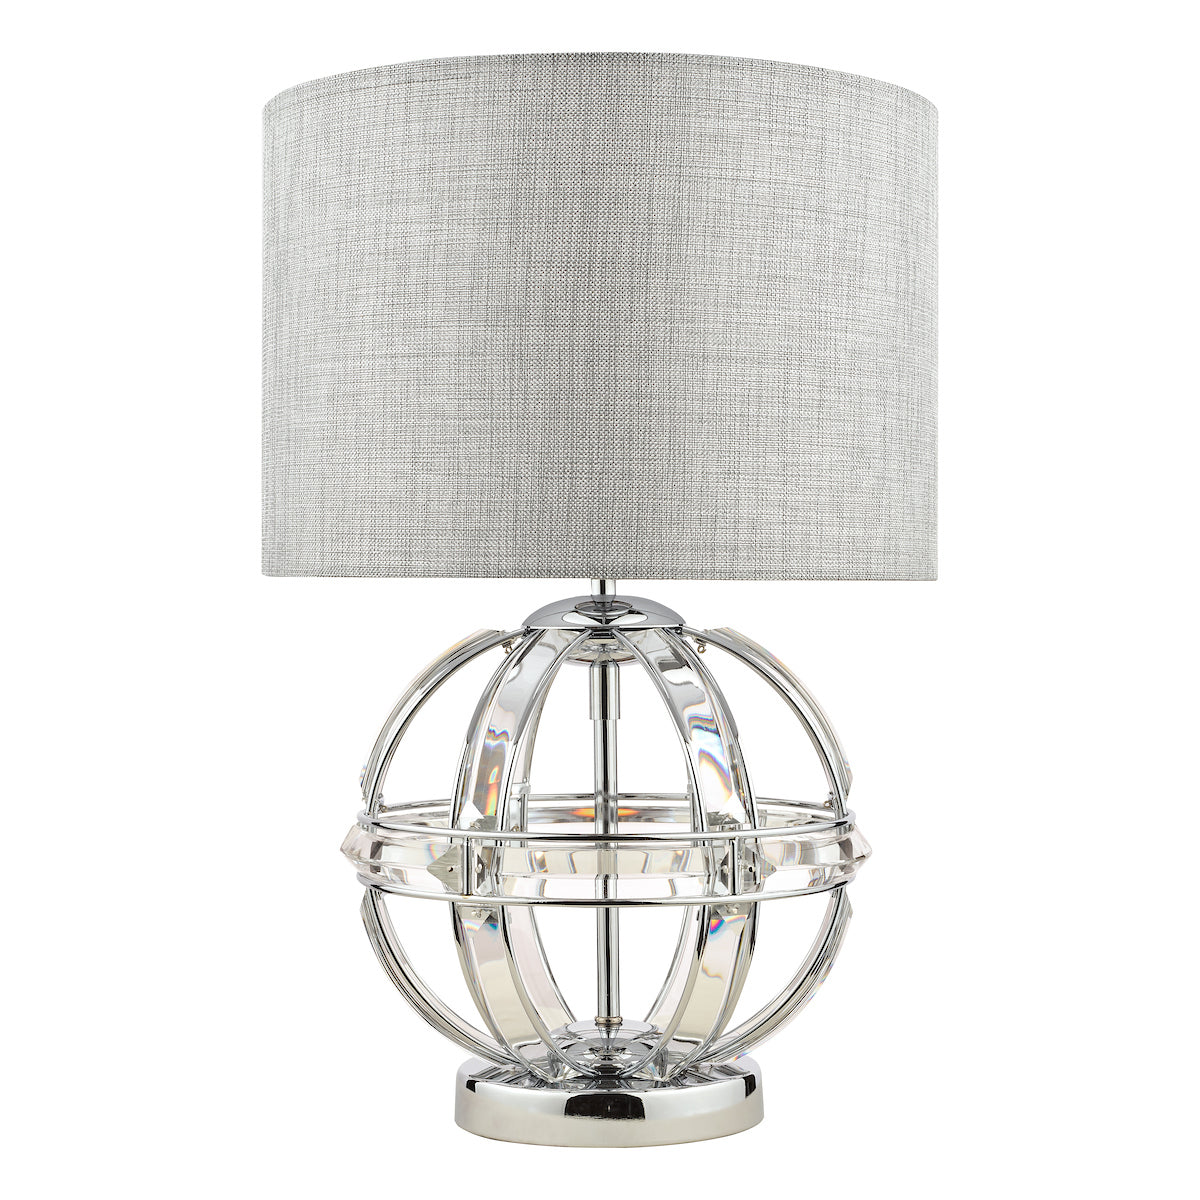 The Aidan table lamp from Laura Ashley is 32 cm in diam and comes with a pale grey linen straight drum shade, the fabric appears to be a rough texture, the base itself is an open globe constructed with a polished chrome frame that houses sections of curved glass that create the globe. It then sits on a solid round metal base also finished in polished chrome. The bulb is housed in the shade section as per most lamps and it is switched with a push button through on the main lamp holder.